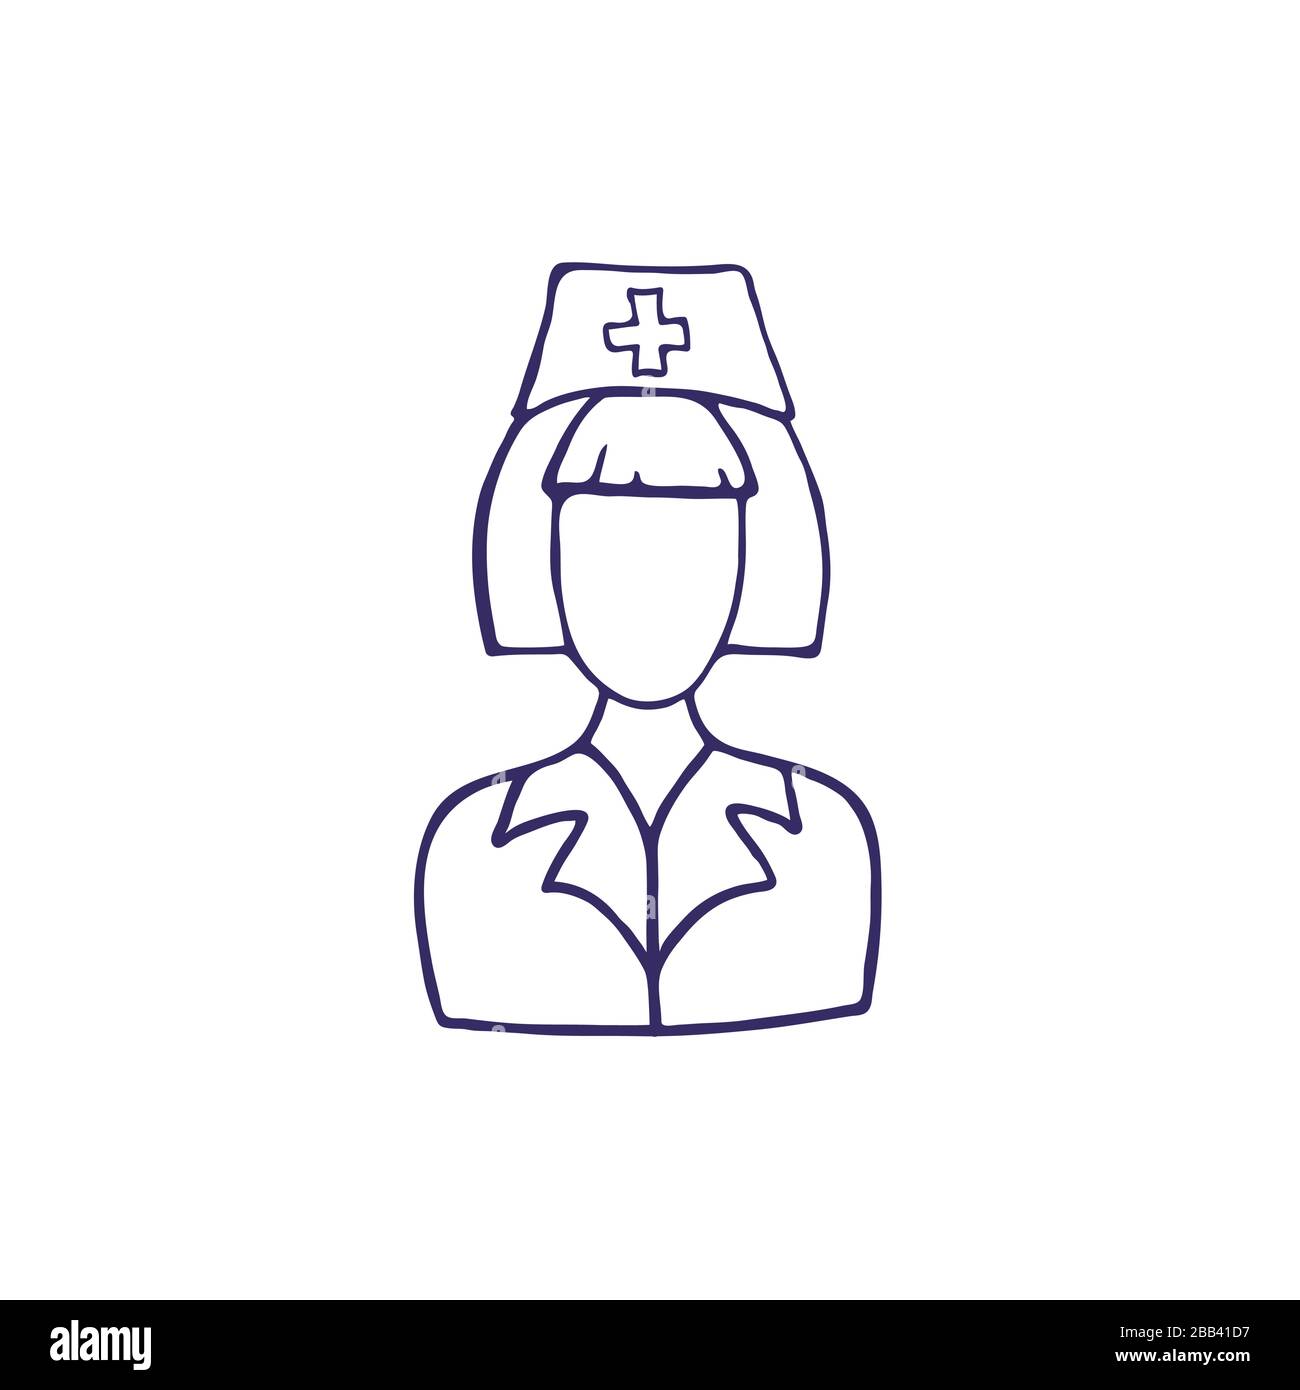 Black hand drawn nurse face icon, wearing hat with cross, isolated on white background. Medical symbol. Doodle vector illustration. Stock Vector